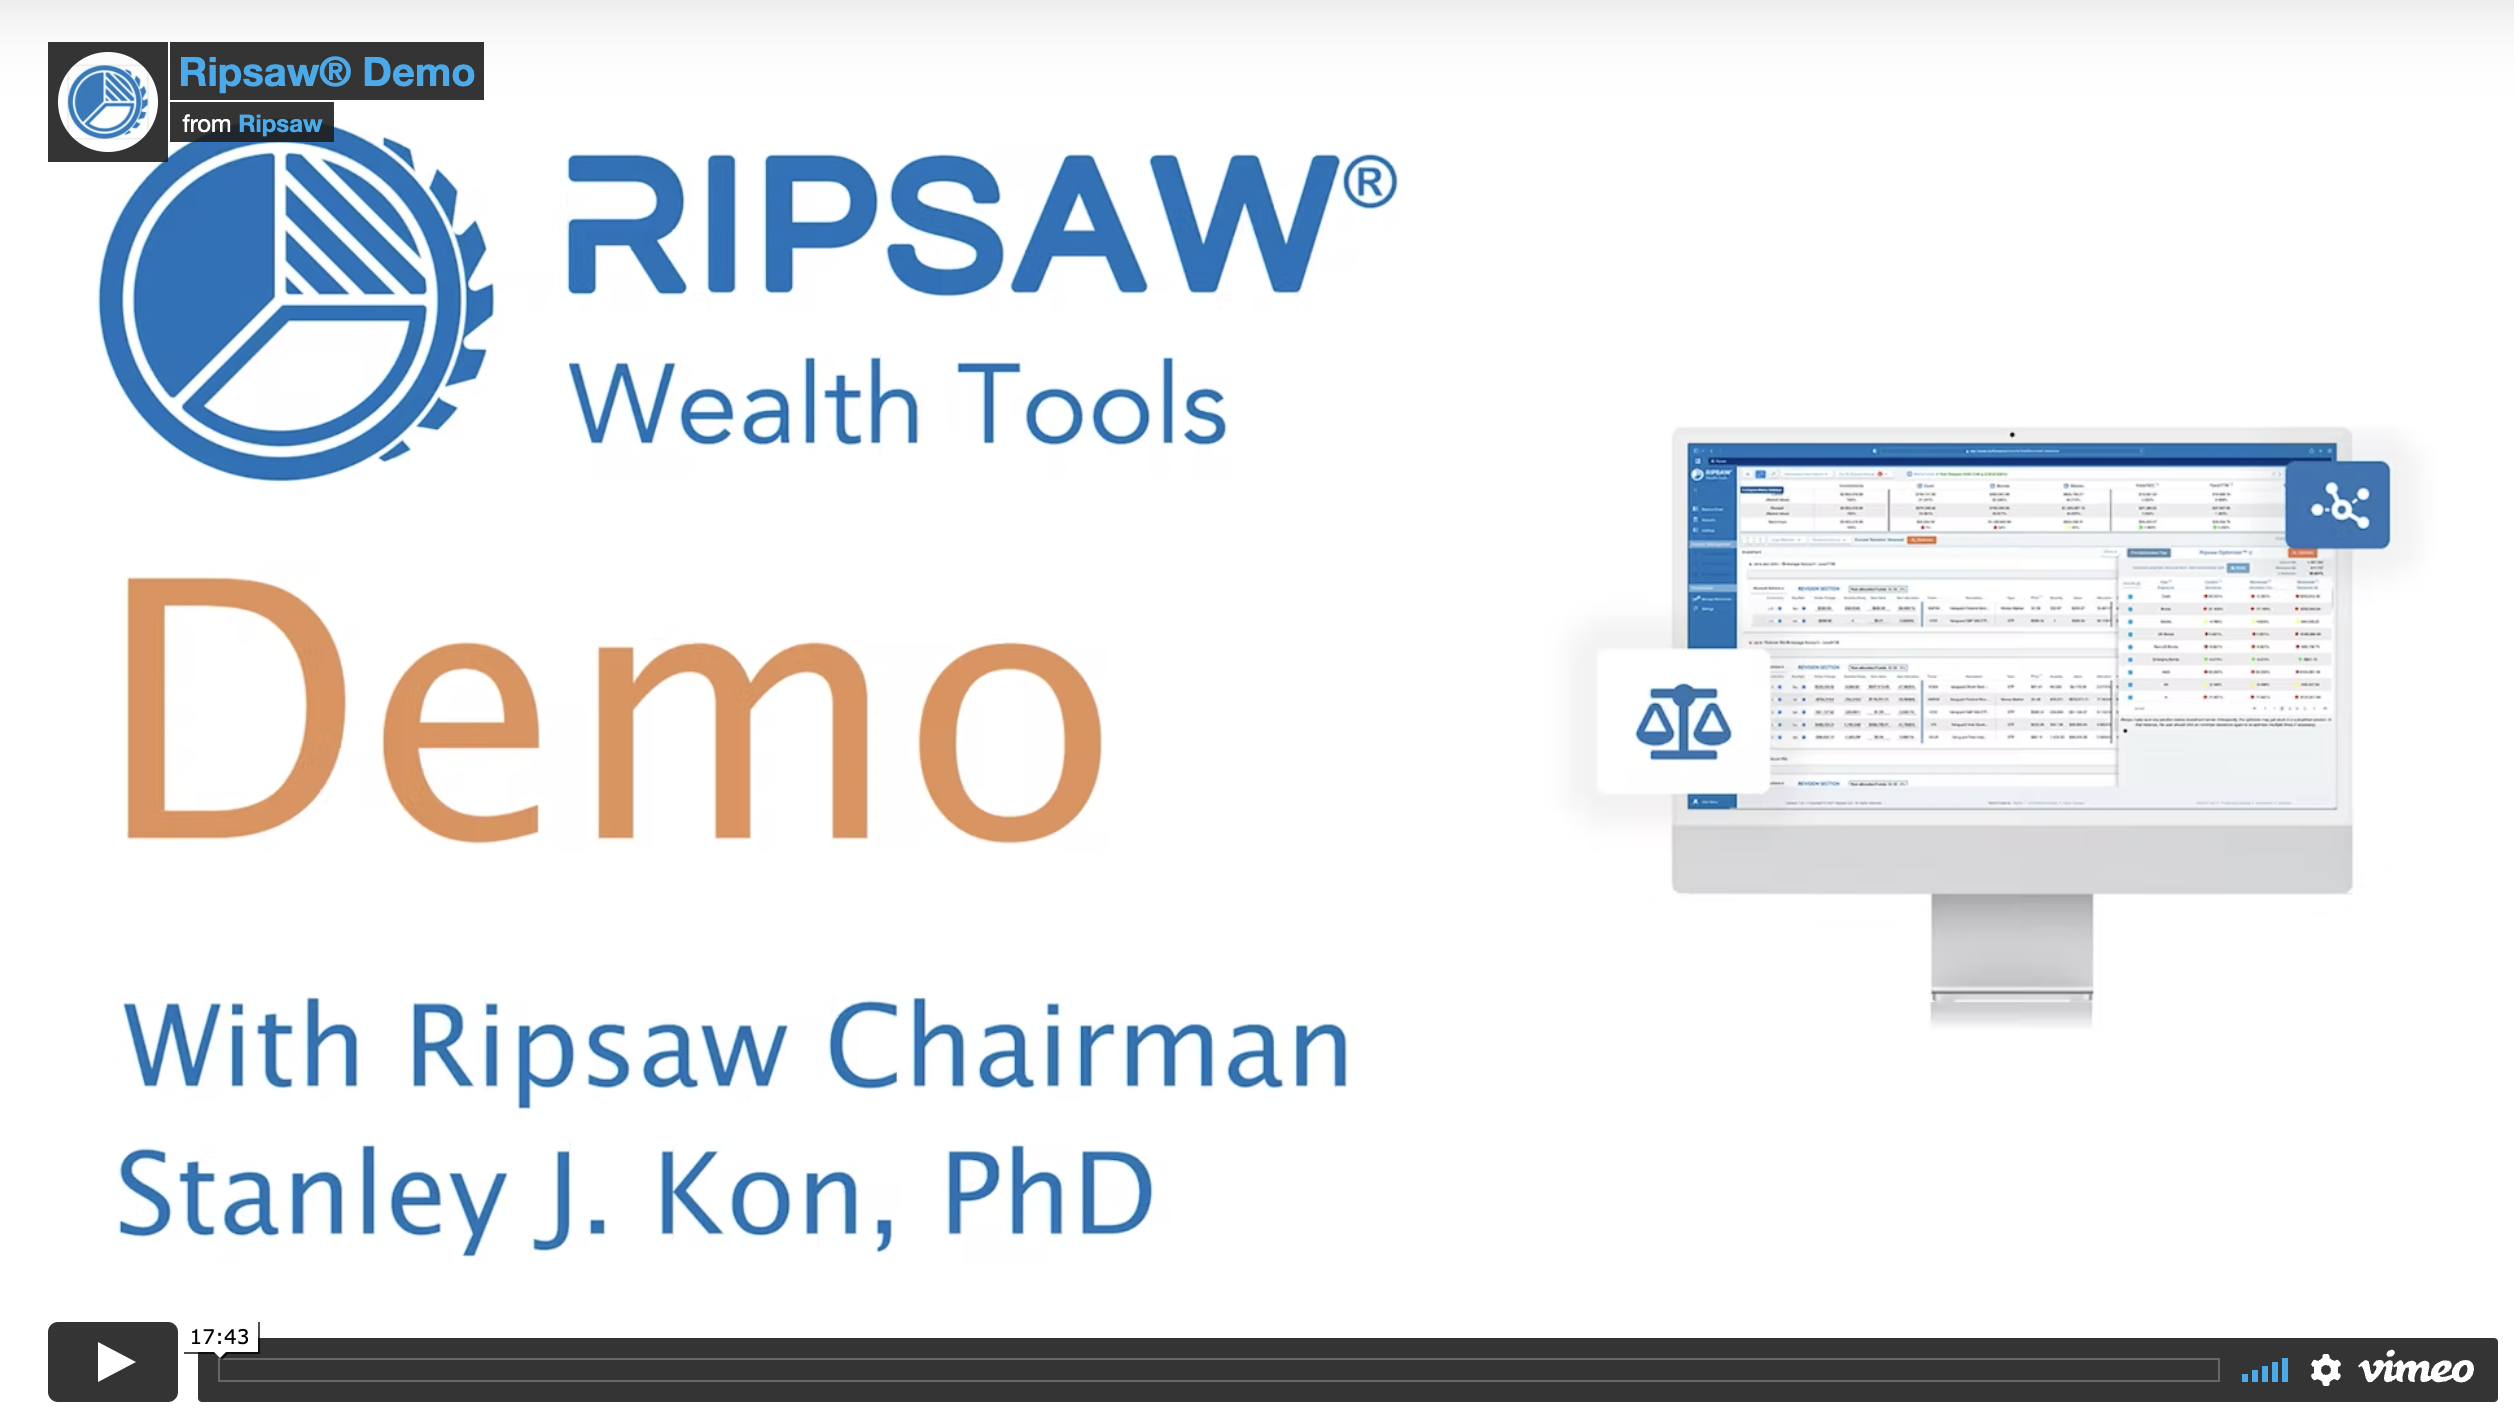 Ripsaw Wealth Tools Demo